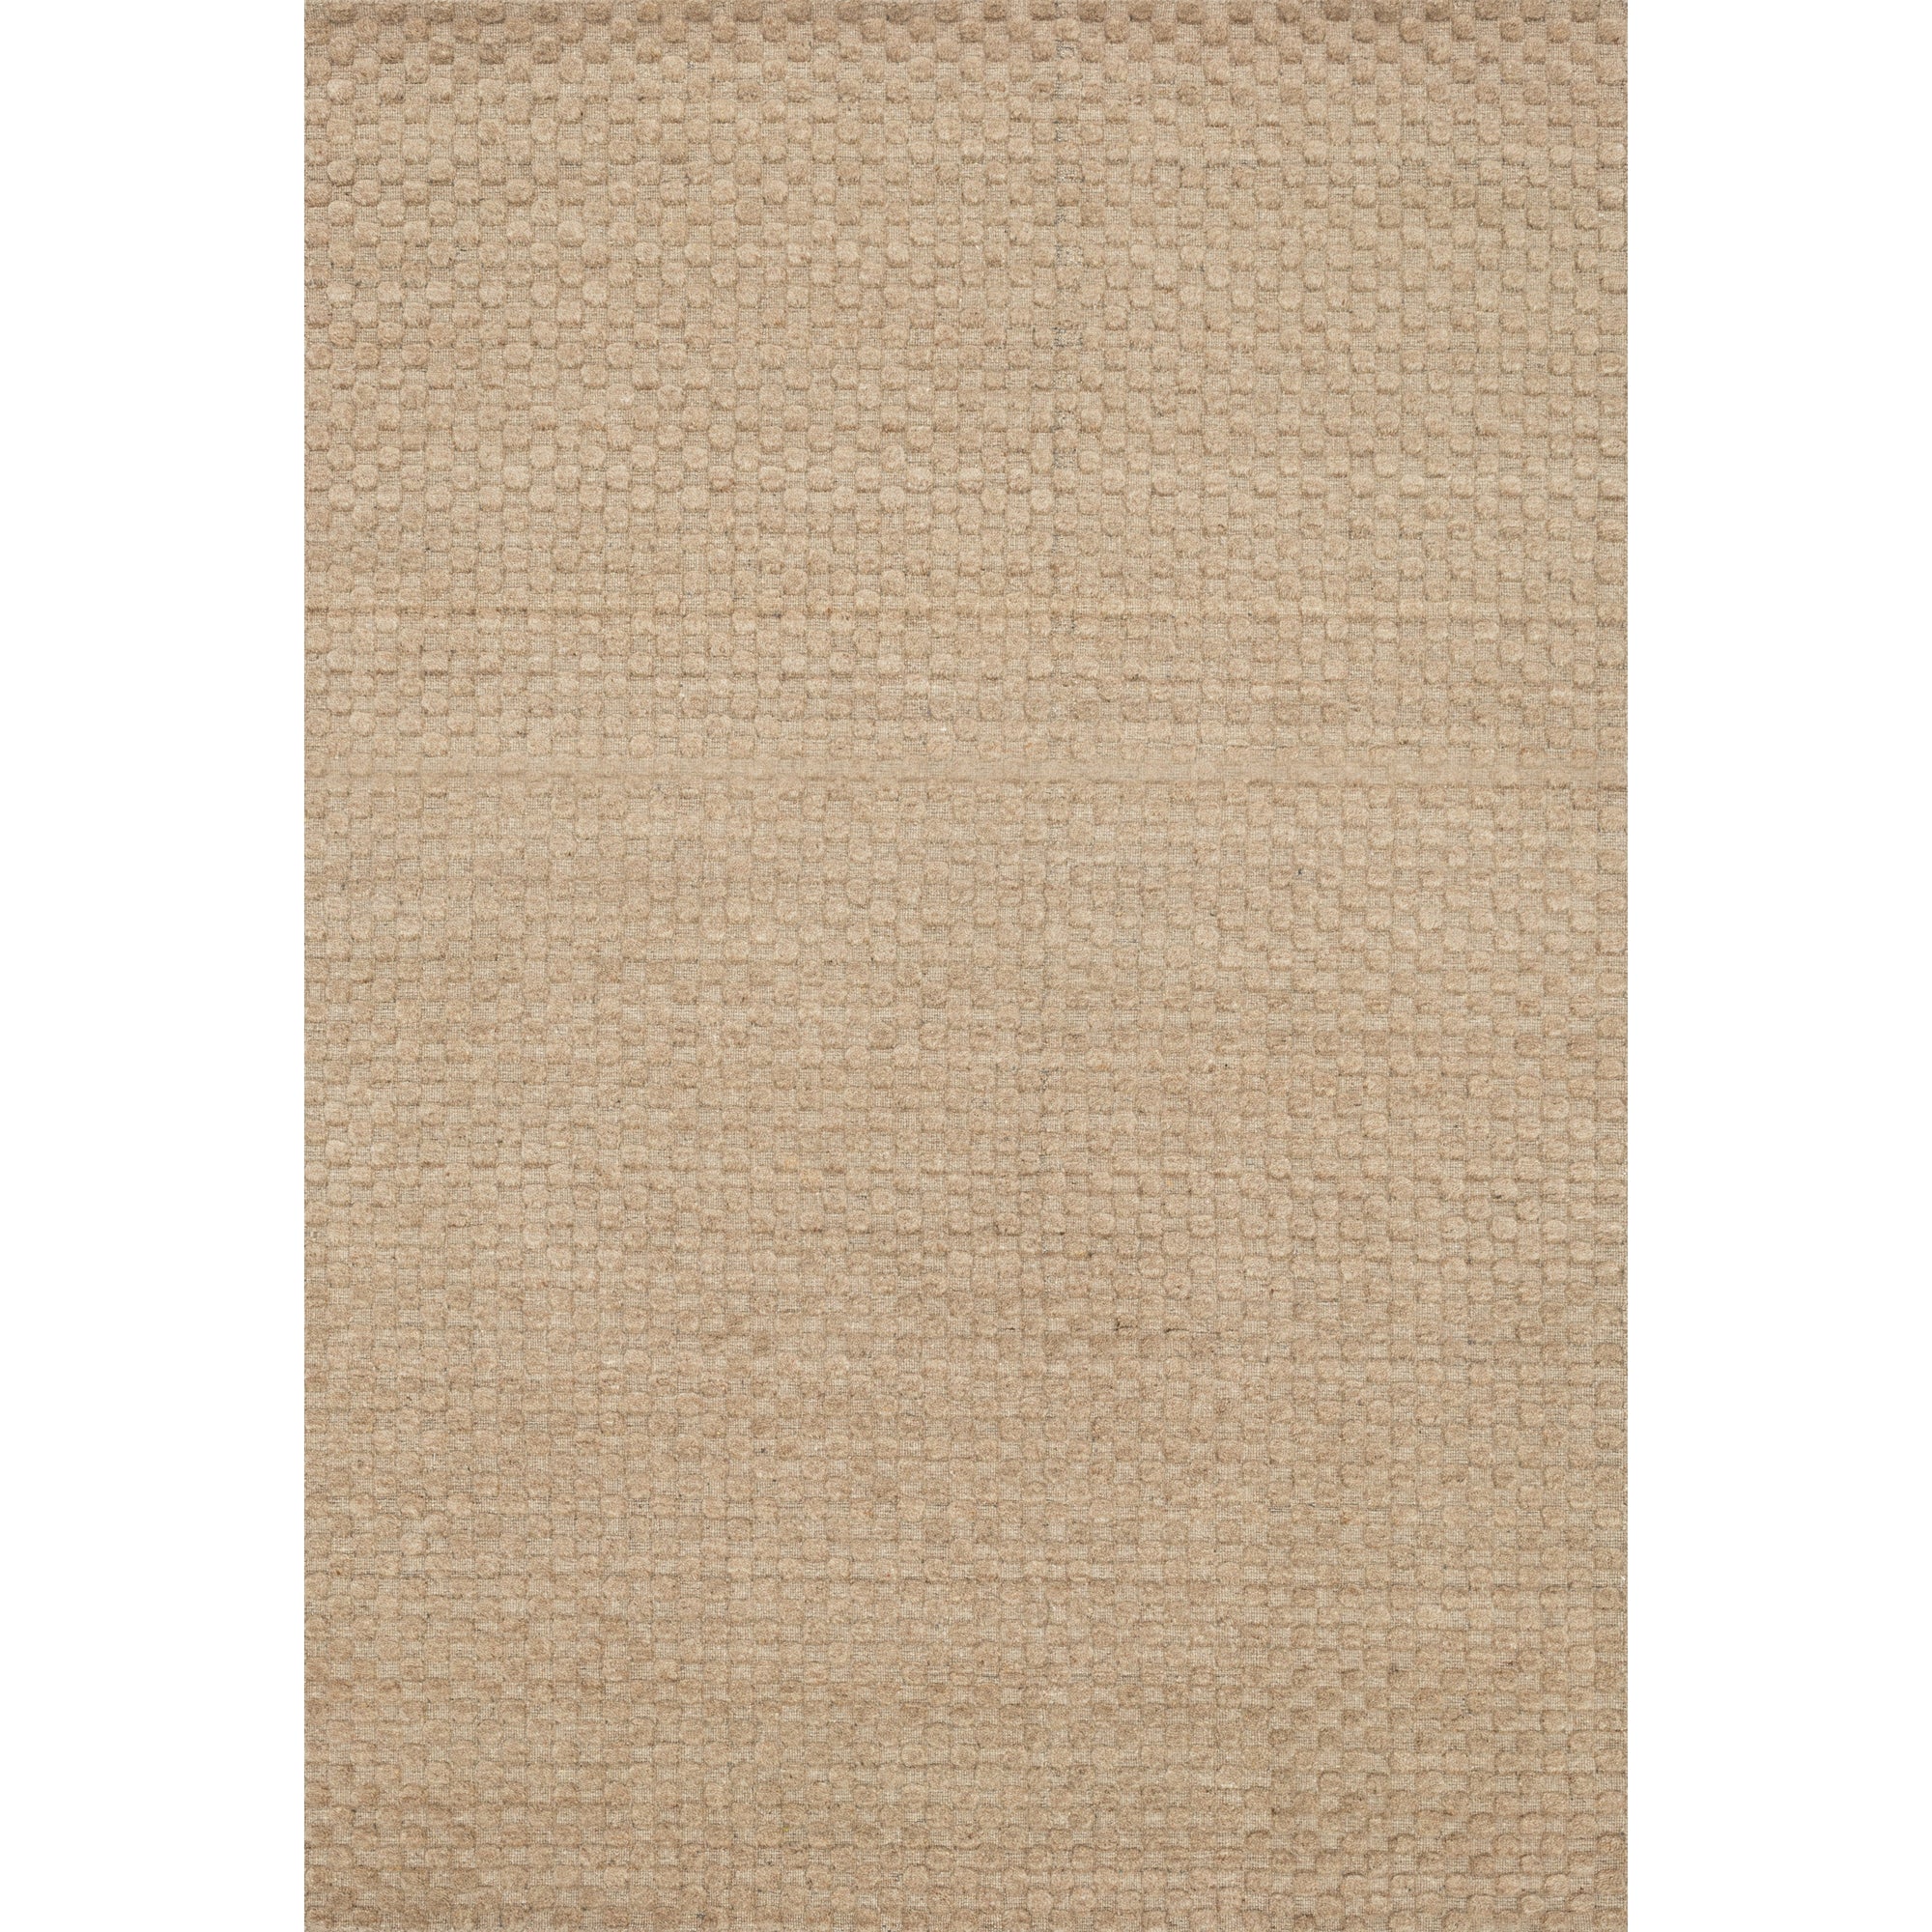 Rugs by Roo Loloi Hadley Dune Area Rug in size 3' 6" x 5' 6"